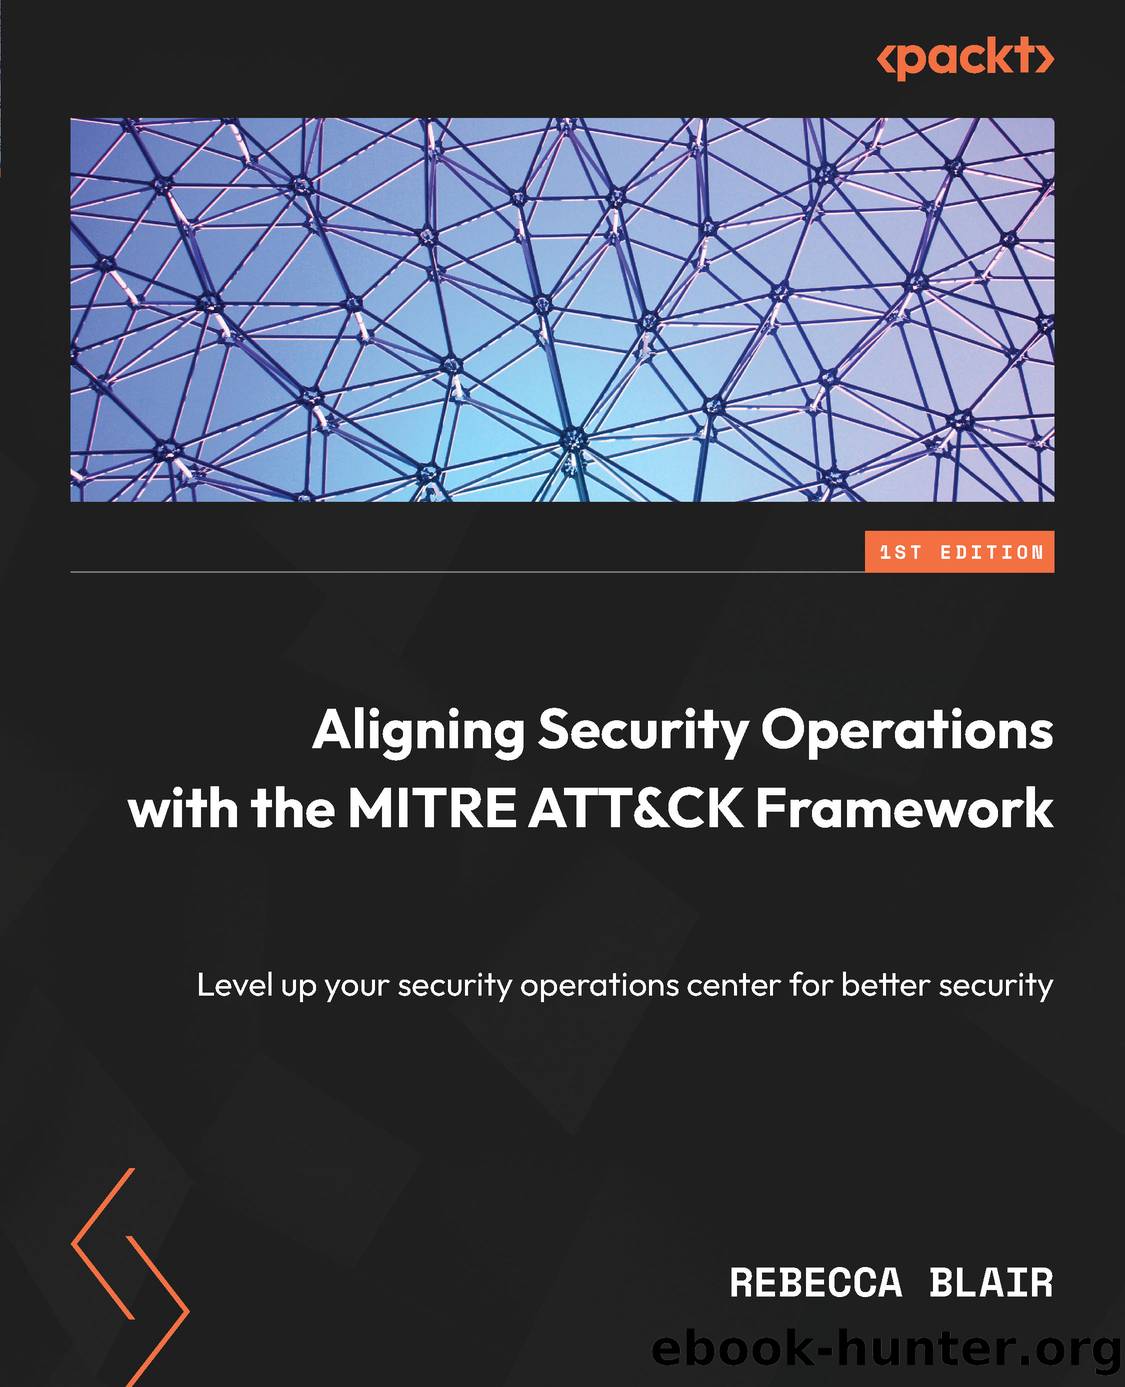 Aligning Security Operations with the MITRE ATT&CK Framework by Rebecca Blair